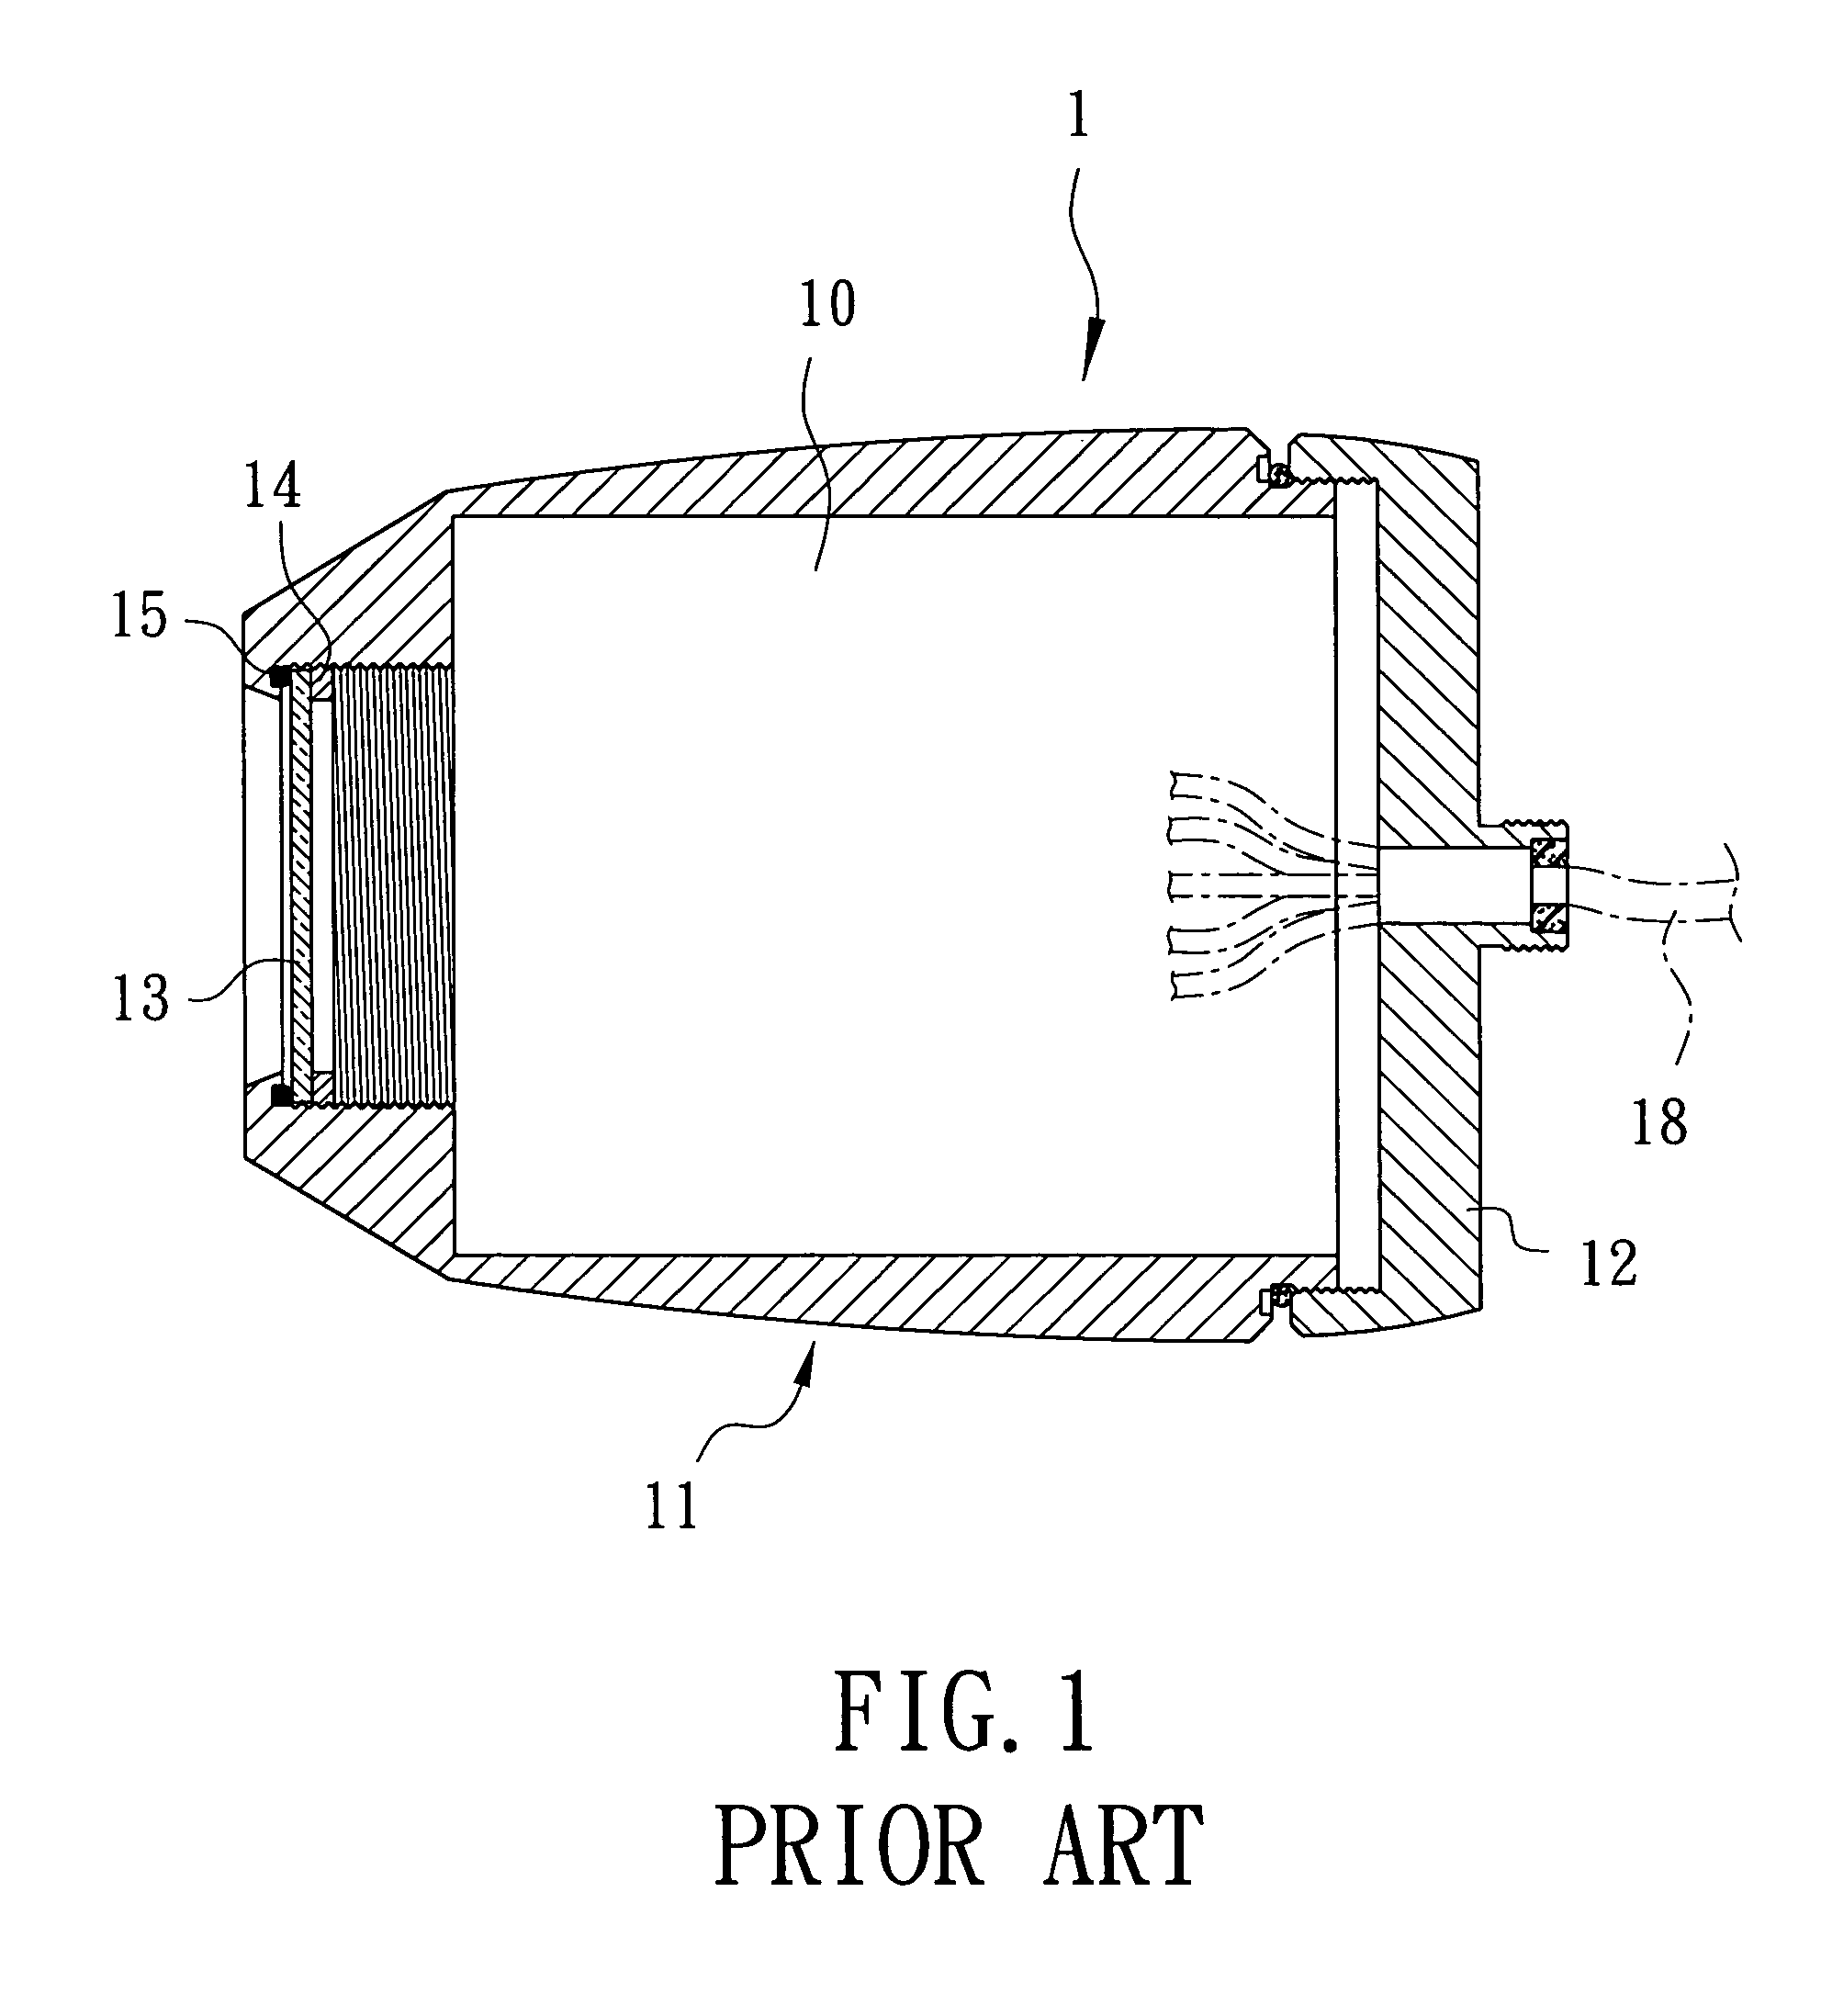 Underwater housing for a monitoring device